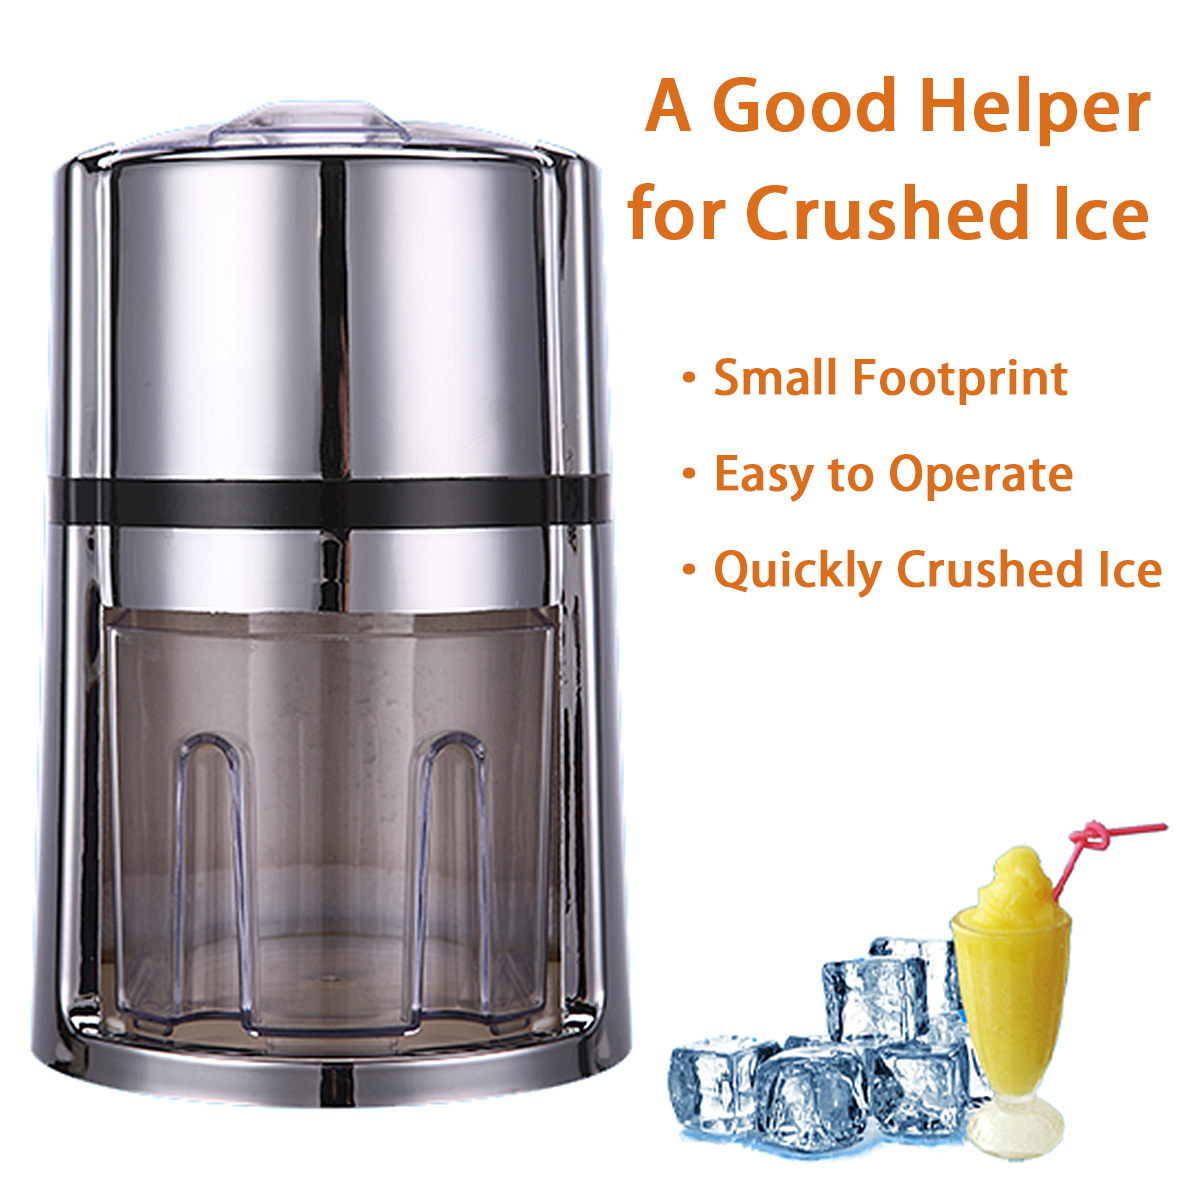 15L-Portable-Manual-Ice-Crusher-Ice-Maker-Snow-Cone-Machine-Ice-ShaverStainless-Steel-Ice-Cream-Scoo-1928427-3